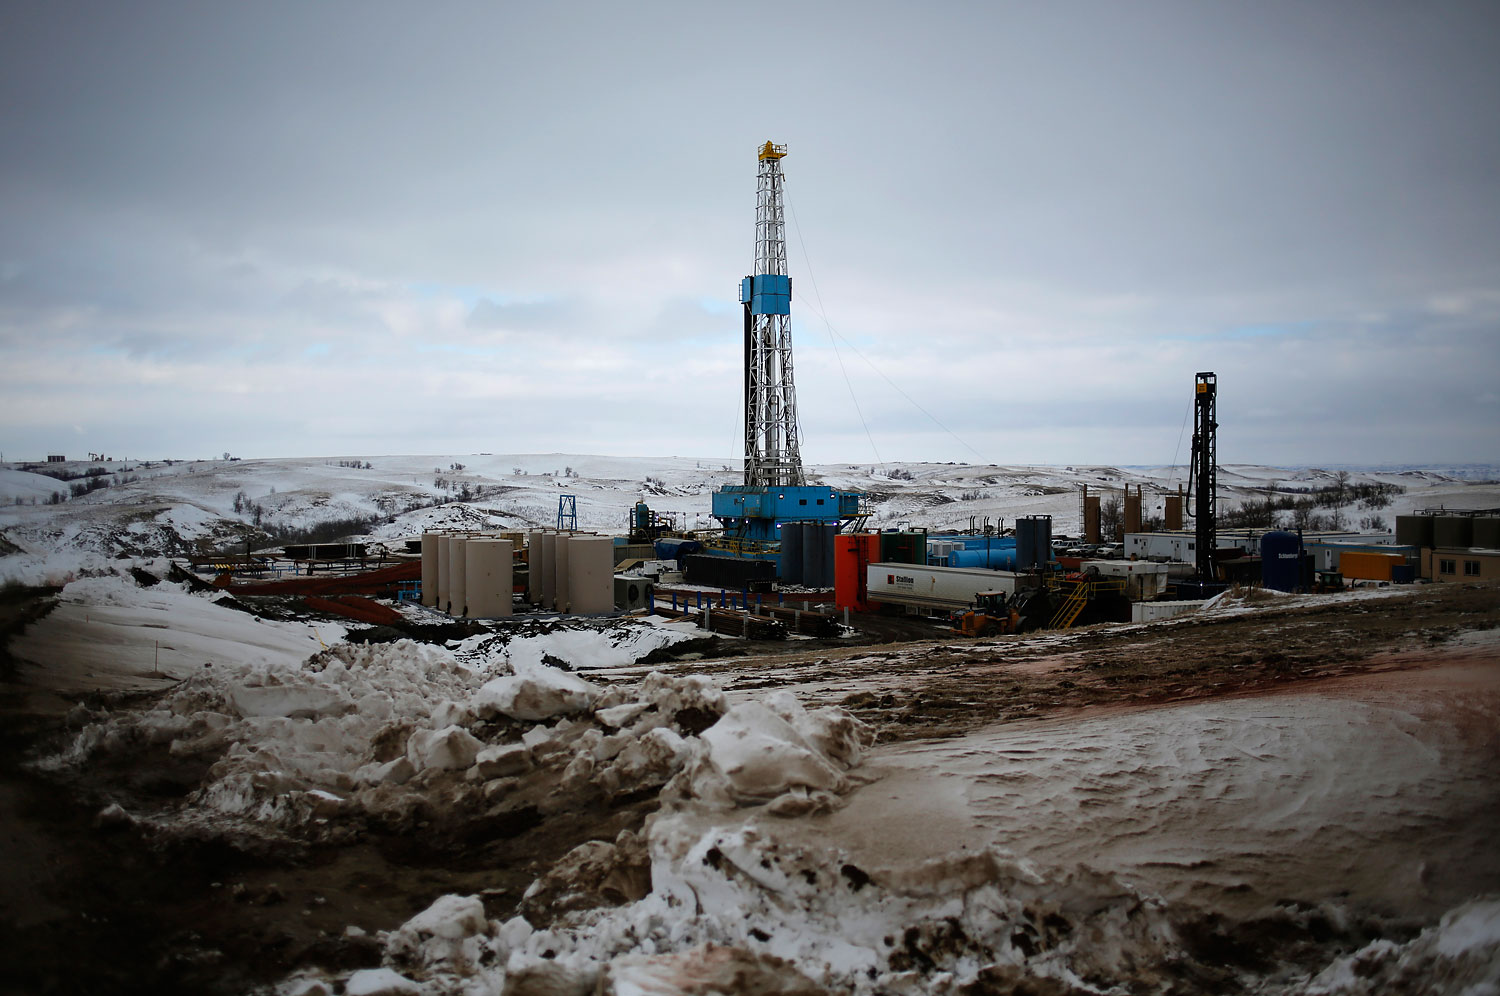 An oil derrick is seen at a fracking site for extracting oil outside of Williston